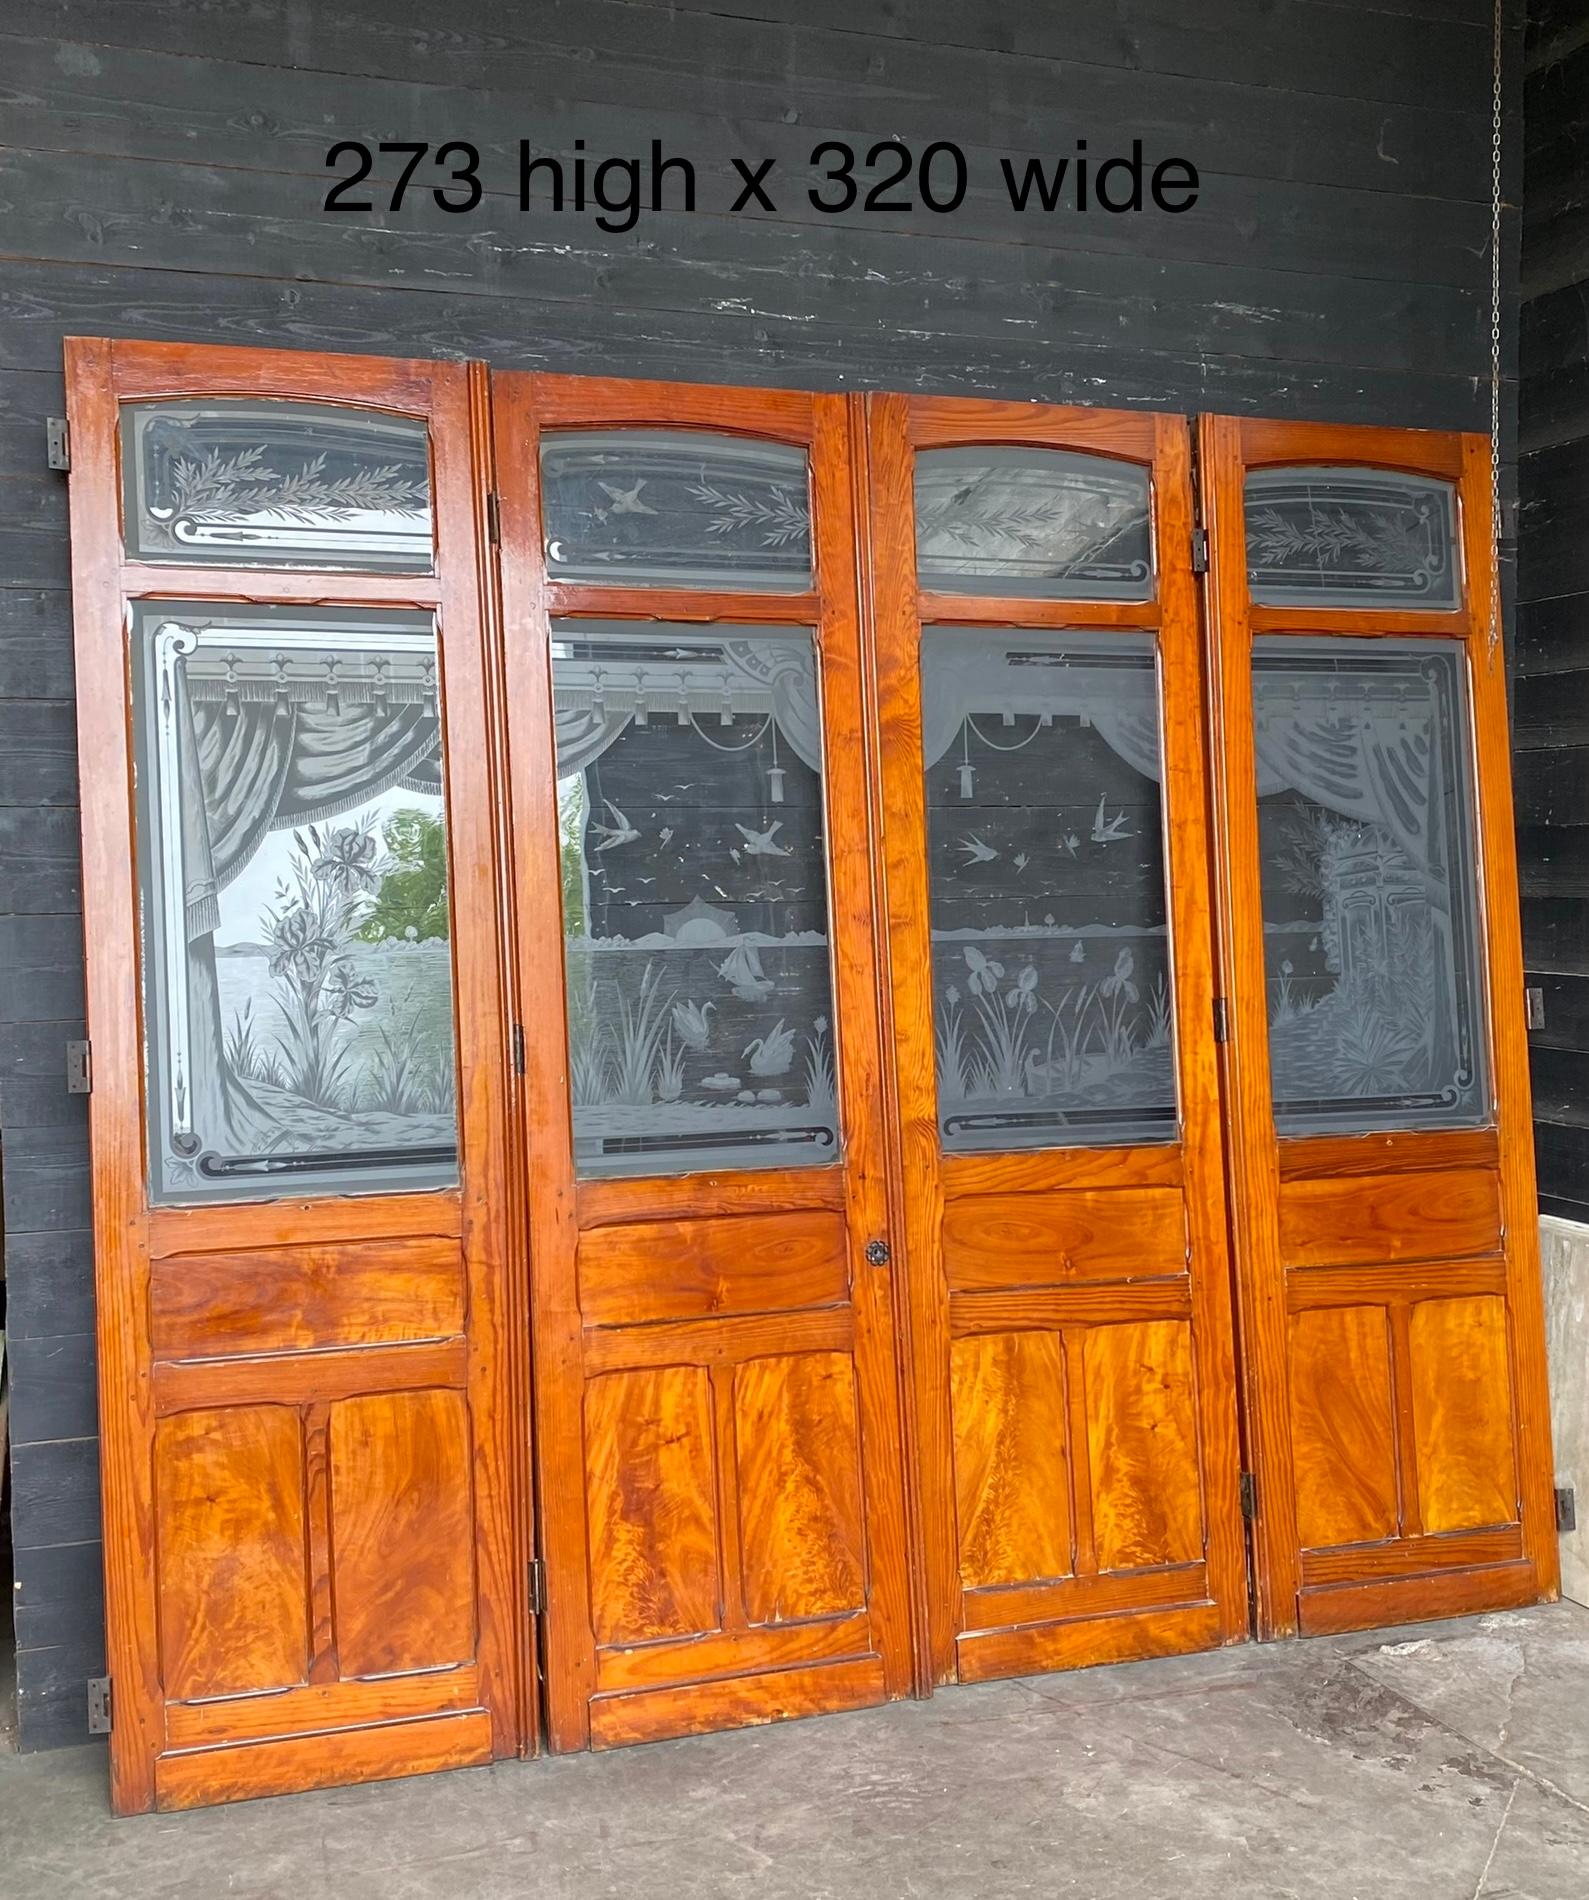 A lovely set of 4 French Chateau doors, the doors made from Pitch Pine and are very good quality. The glass has no breaks or ceacks.
In excellent original condition.
Height 273 cm
Width 320 cm.